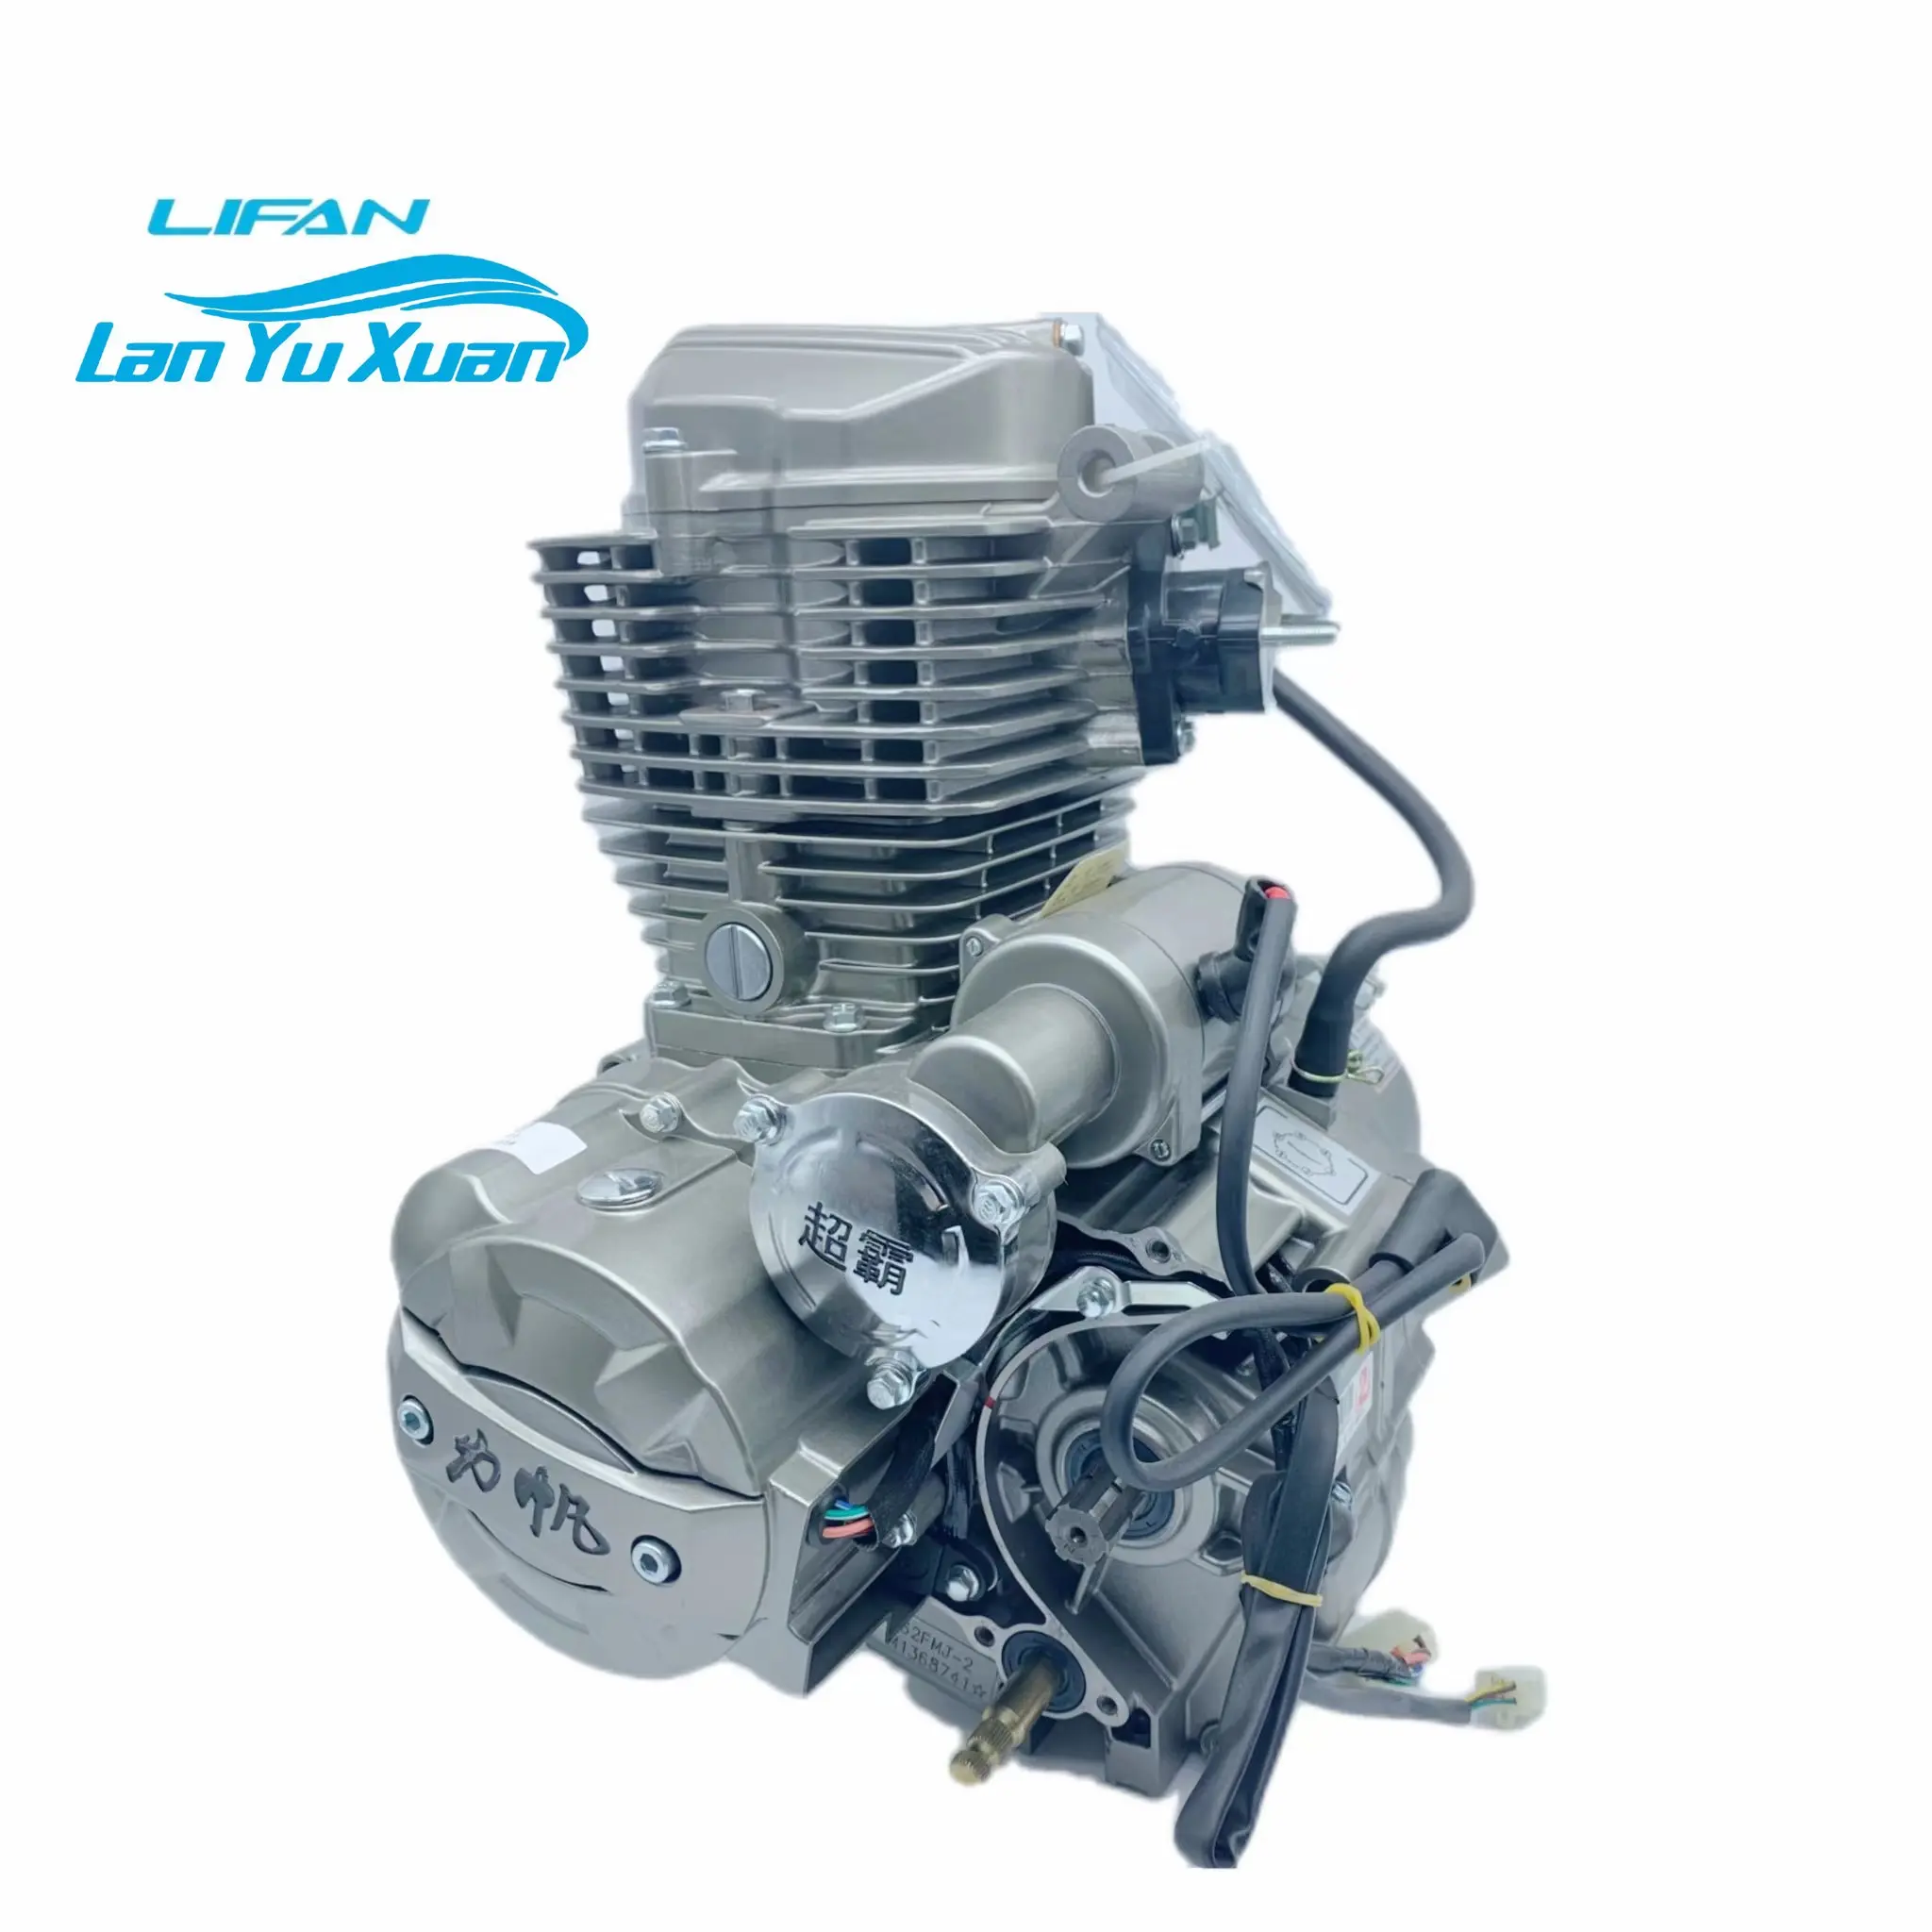 forklift parts komatsu knuckle left is suitable for komatsu forklift fine parts freight collect Hot selling Lifan motorcycle 250cc engine Engine motorcycle 250cc, China motorcycle Lifan engine tricycle suitable for freight